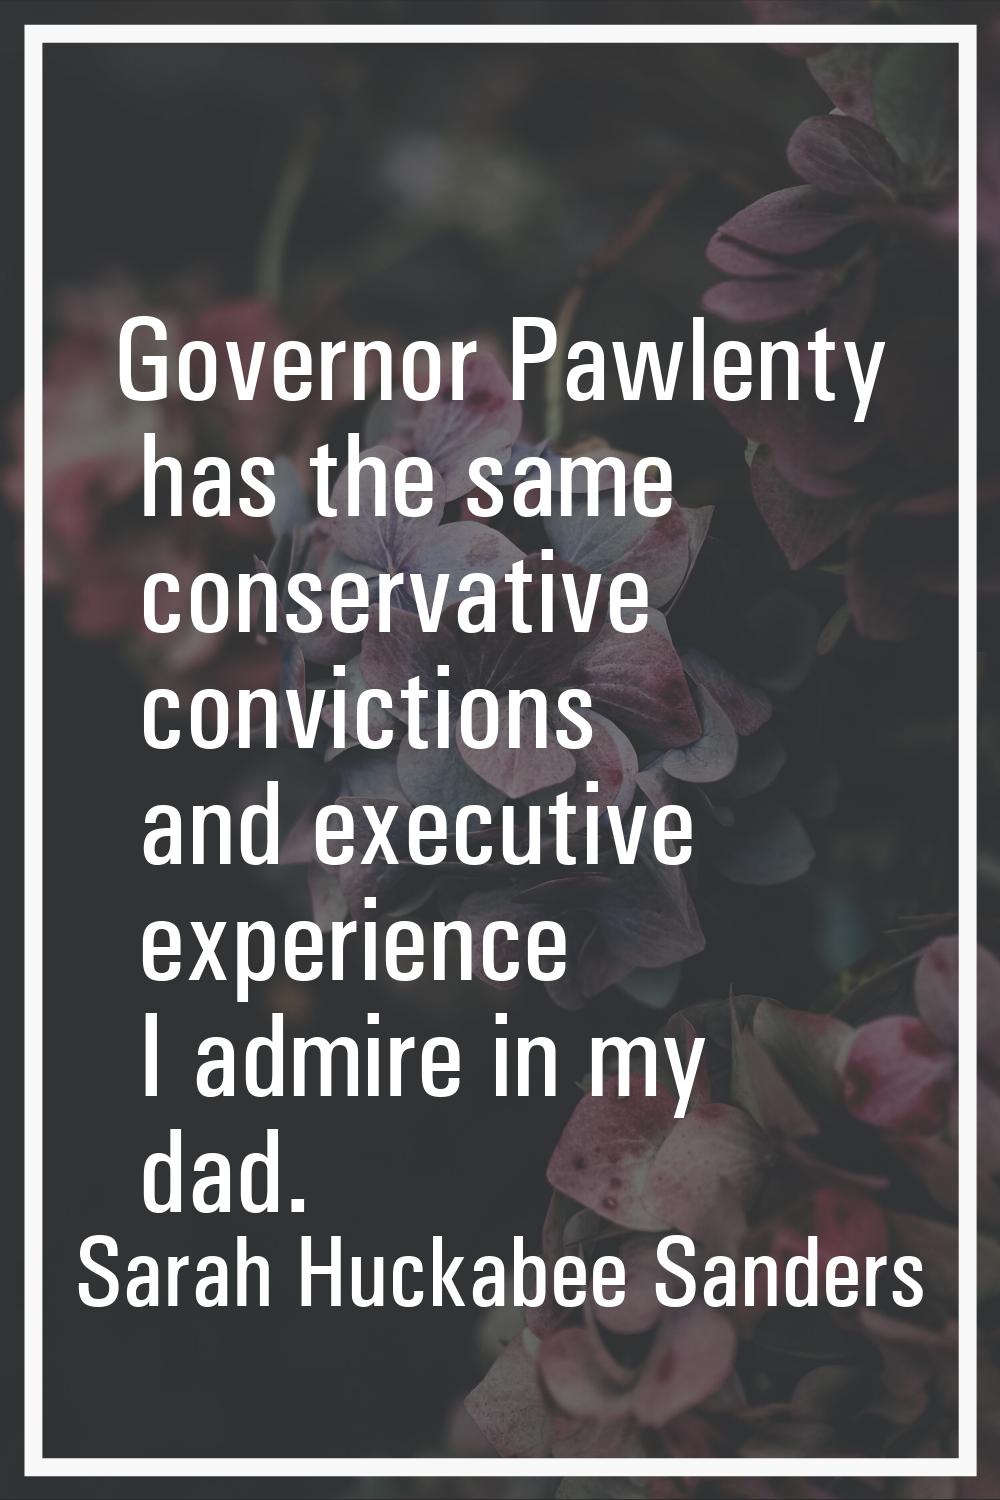 Governor Pawlenty has the same conservative convictions and executive experience I admire in my dad